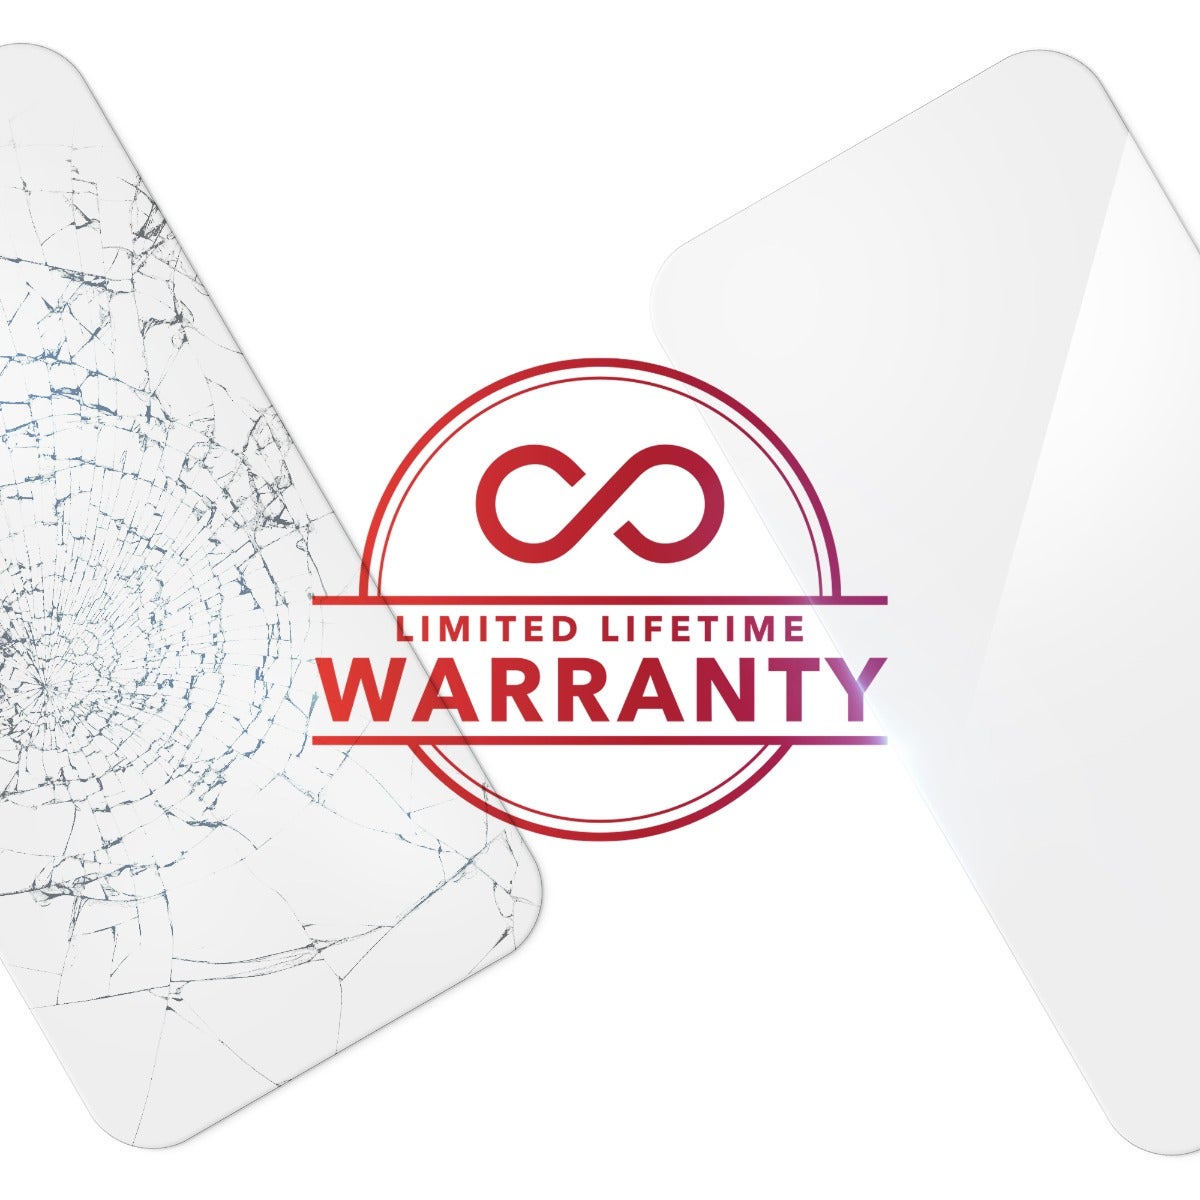 Limited Lifetime Warranty
||If your InvisibleShield ever gets worn or damaged, we will replace it for as long as you own your device.
